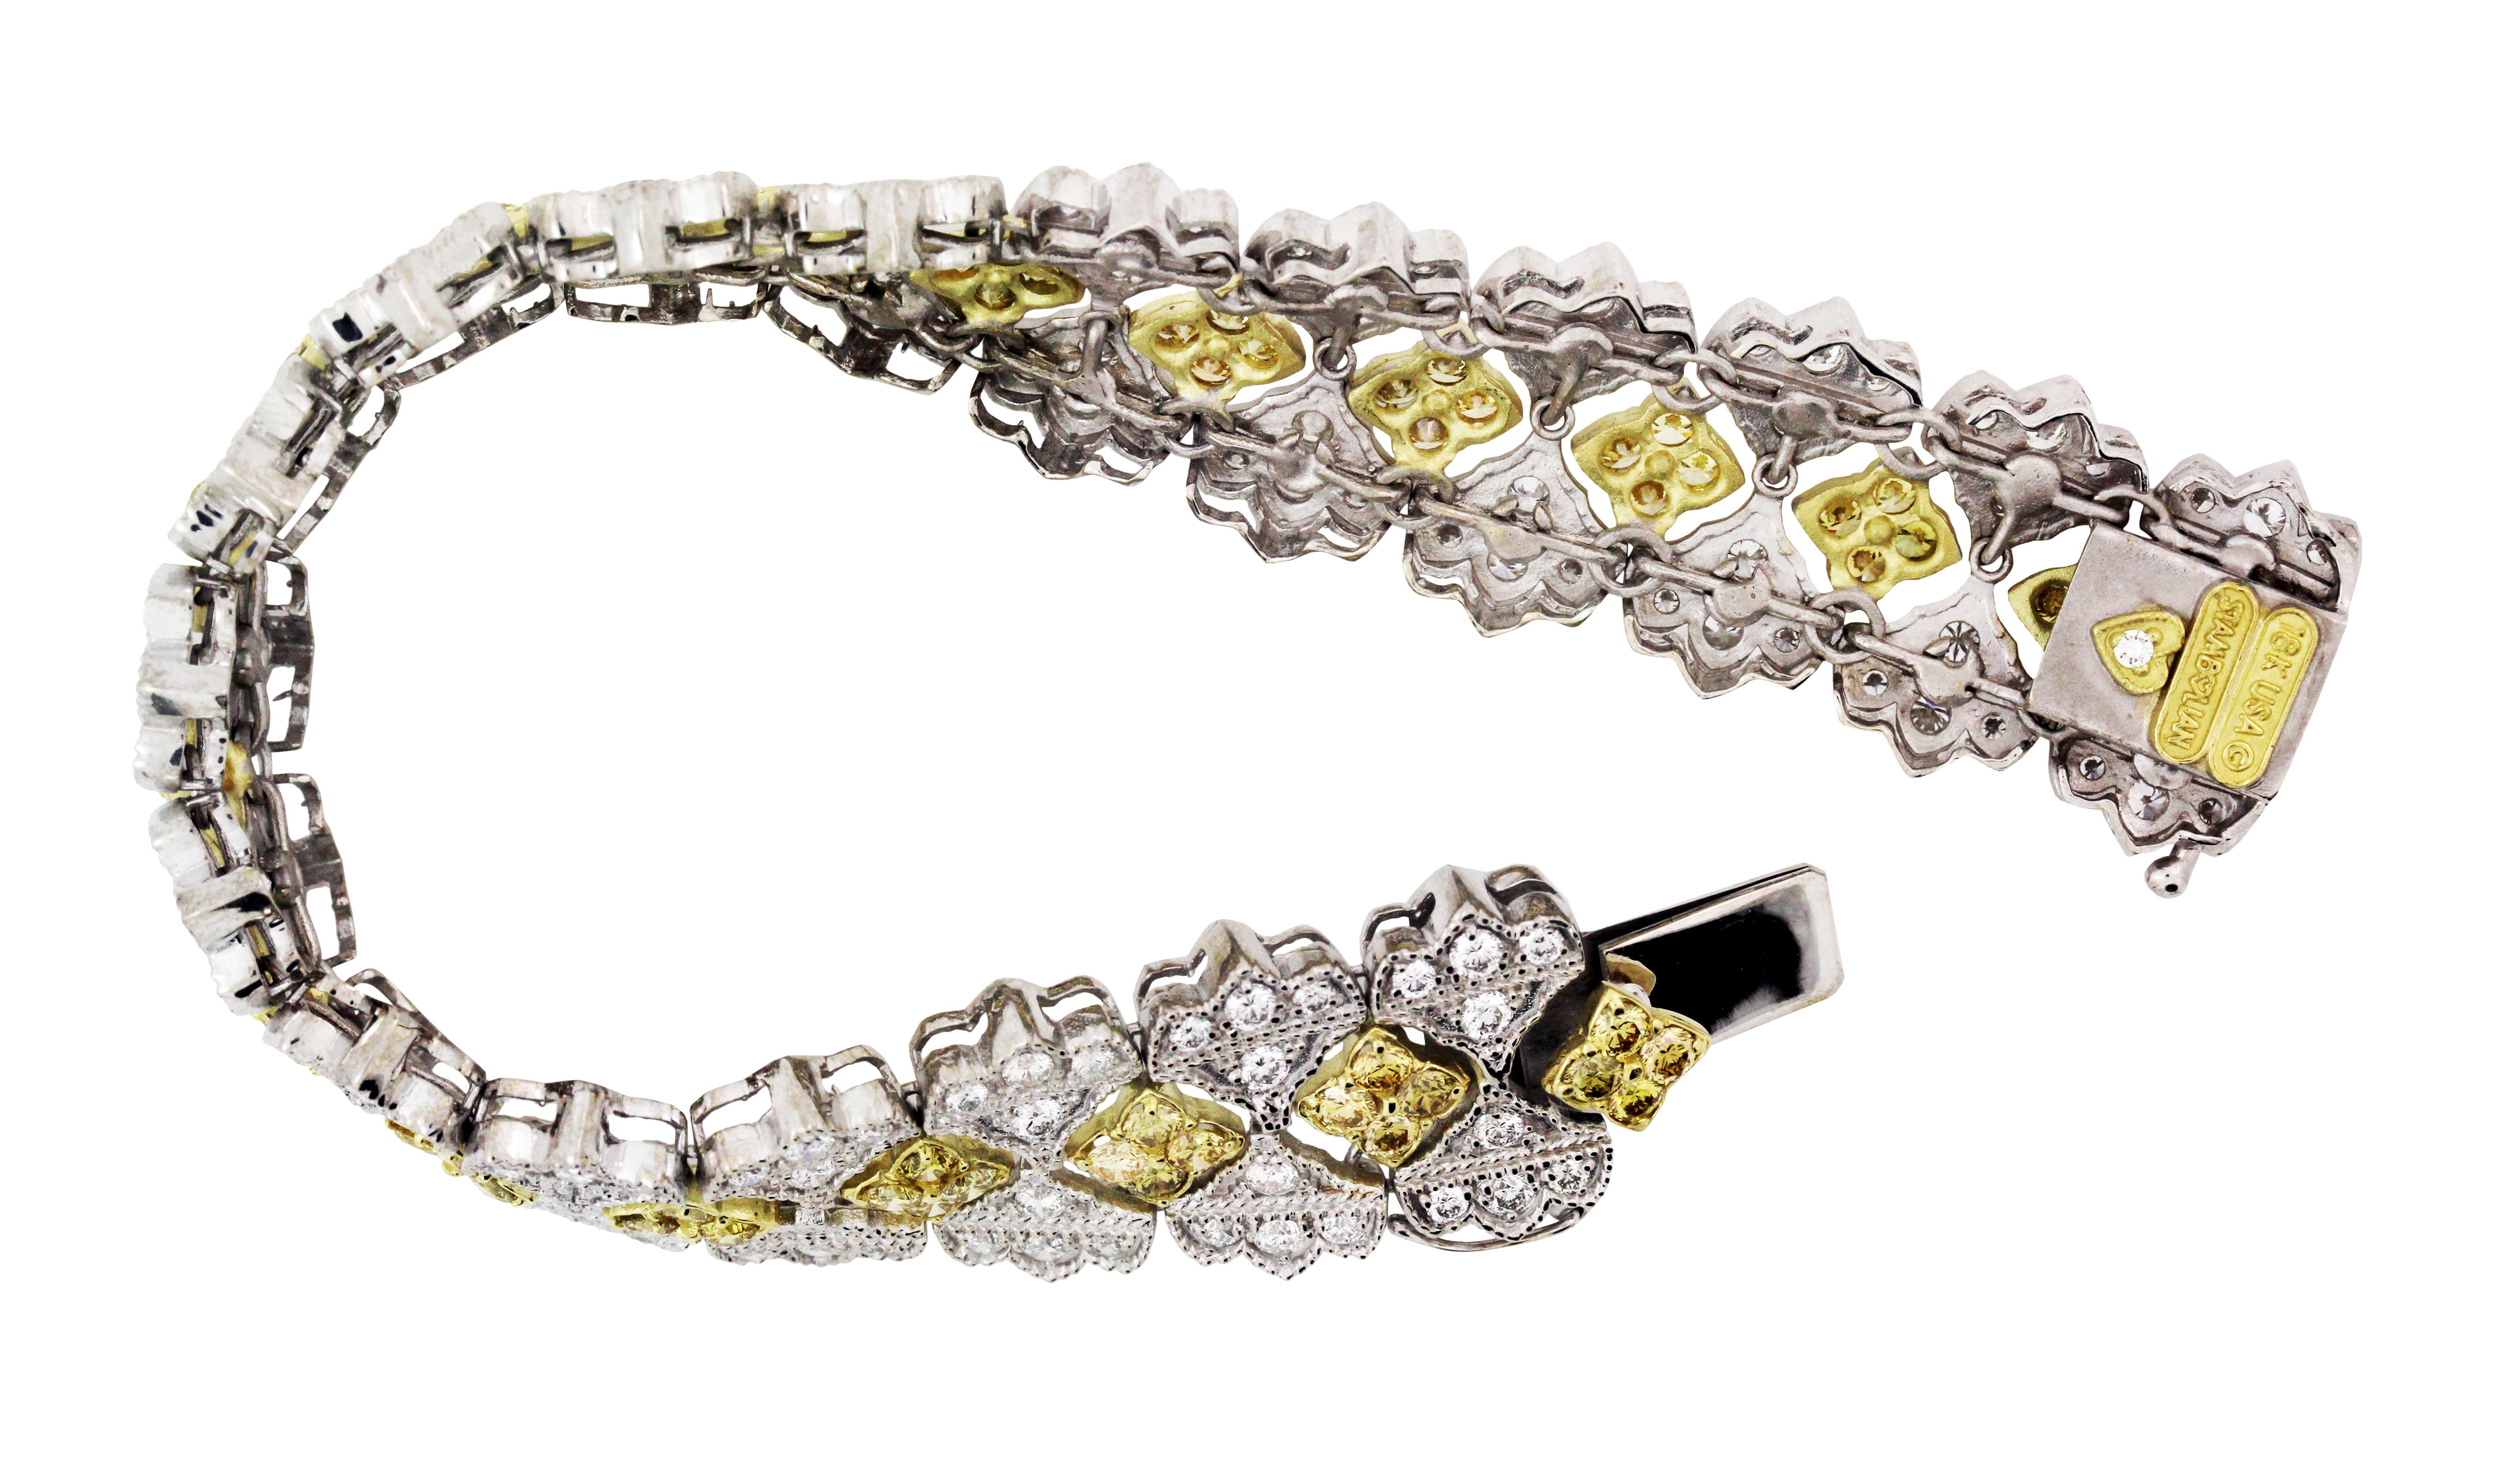 18K Yellow and White Two-Tone Gold White and Yellow Diamond Flexible Bracelet

5.03 carat Canary Diamonds
5.00 carat White Diamonds (G color, VS clarity)

This flexible bracelet is from the Stambolian 